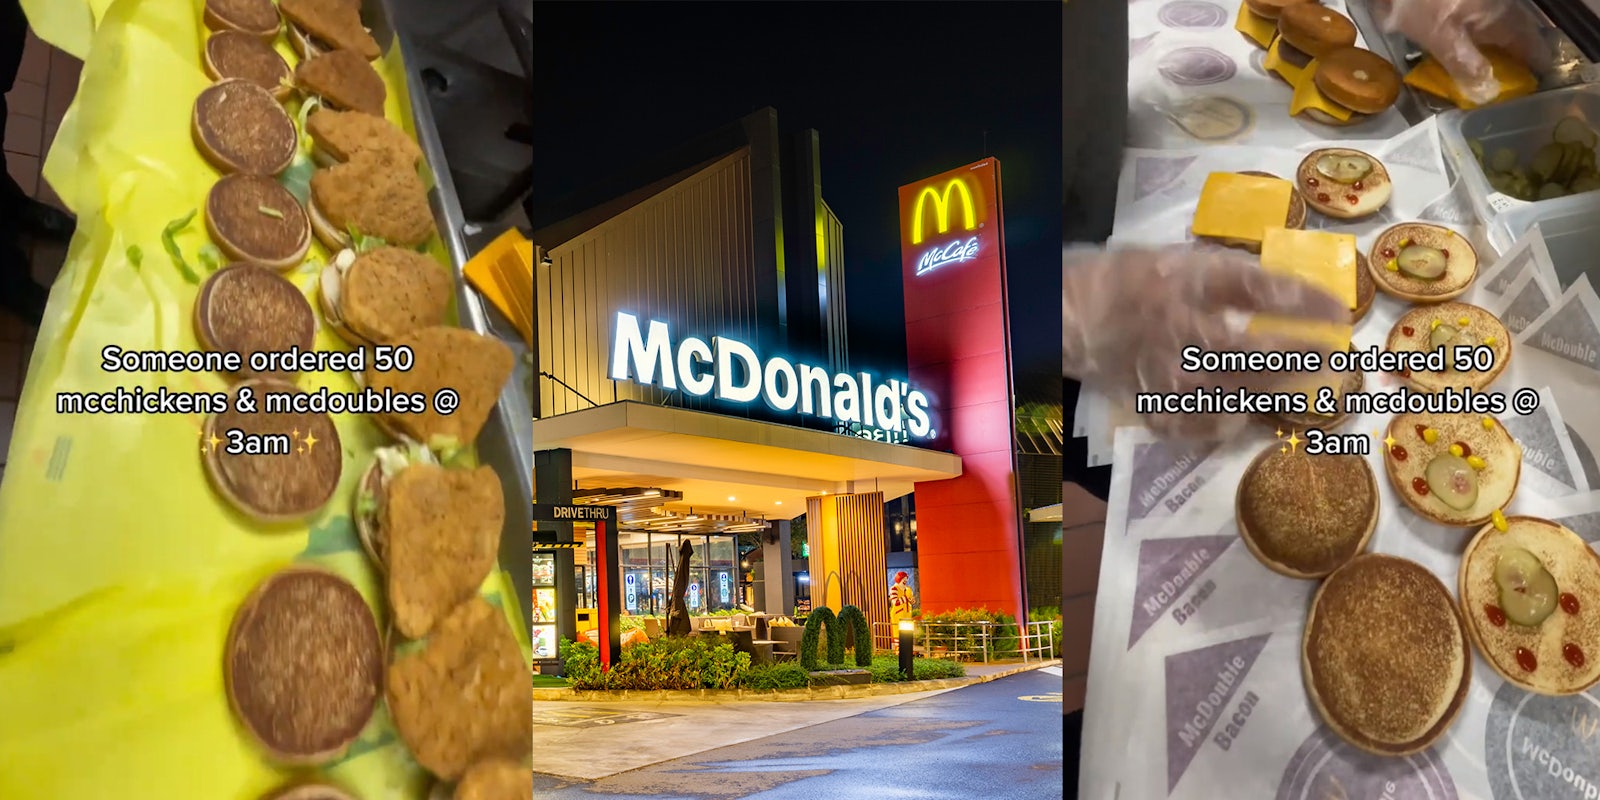 McDonald’s worker has to prepare 3am order of 50 McChickens and 50 McDoubles